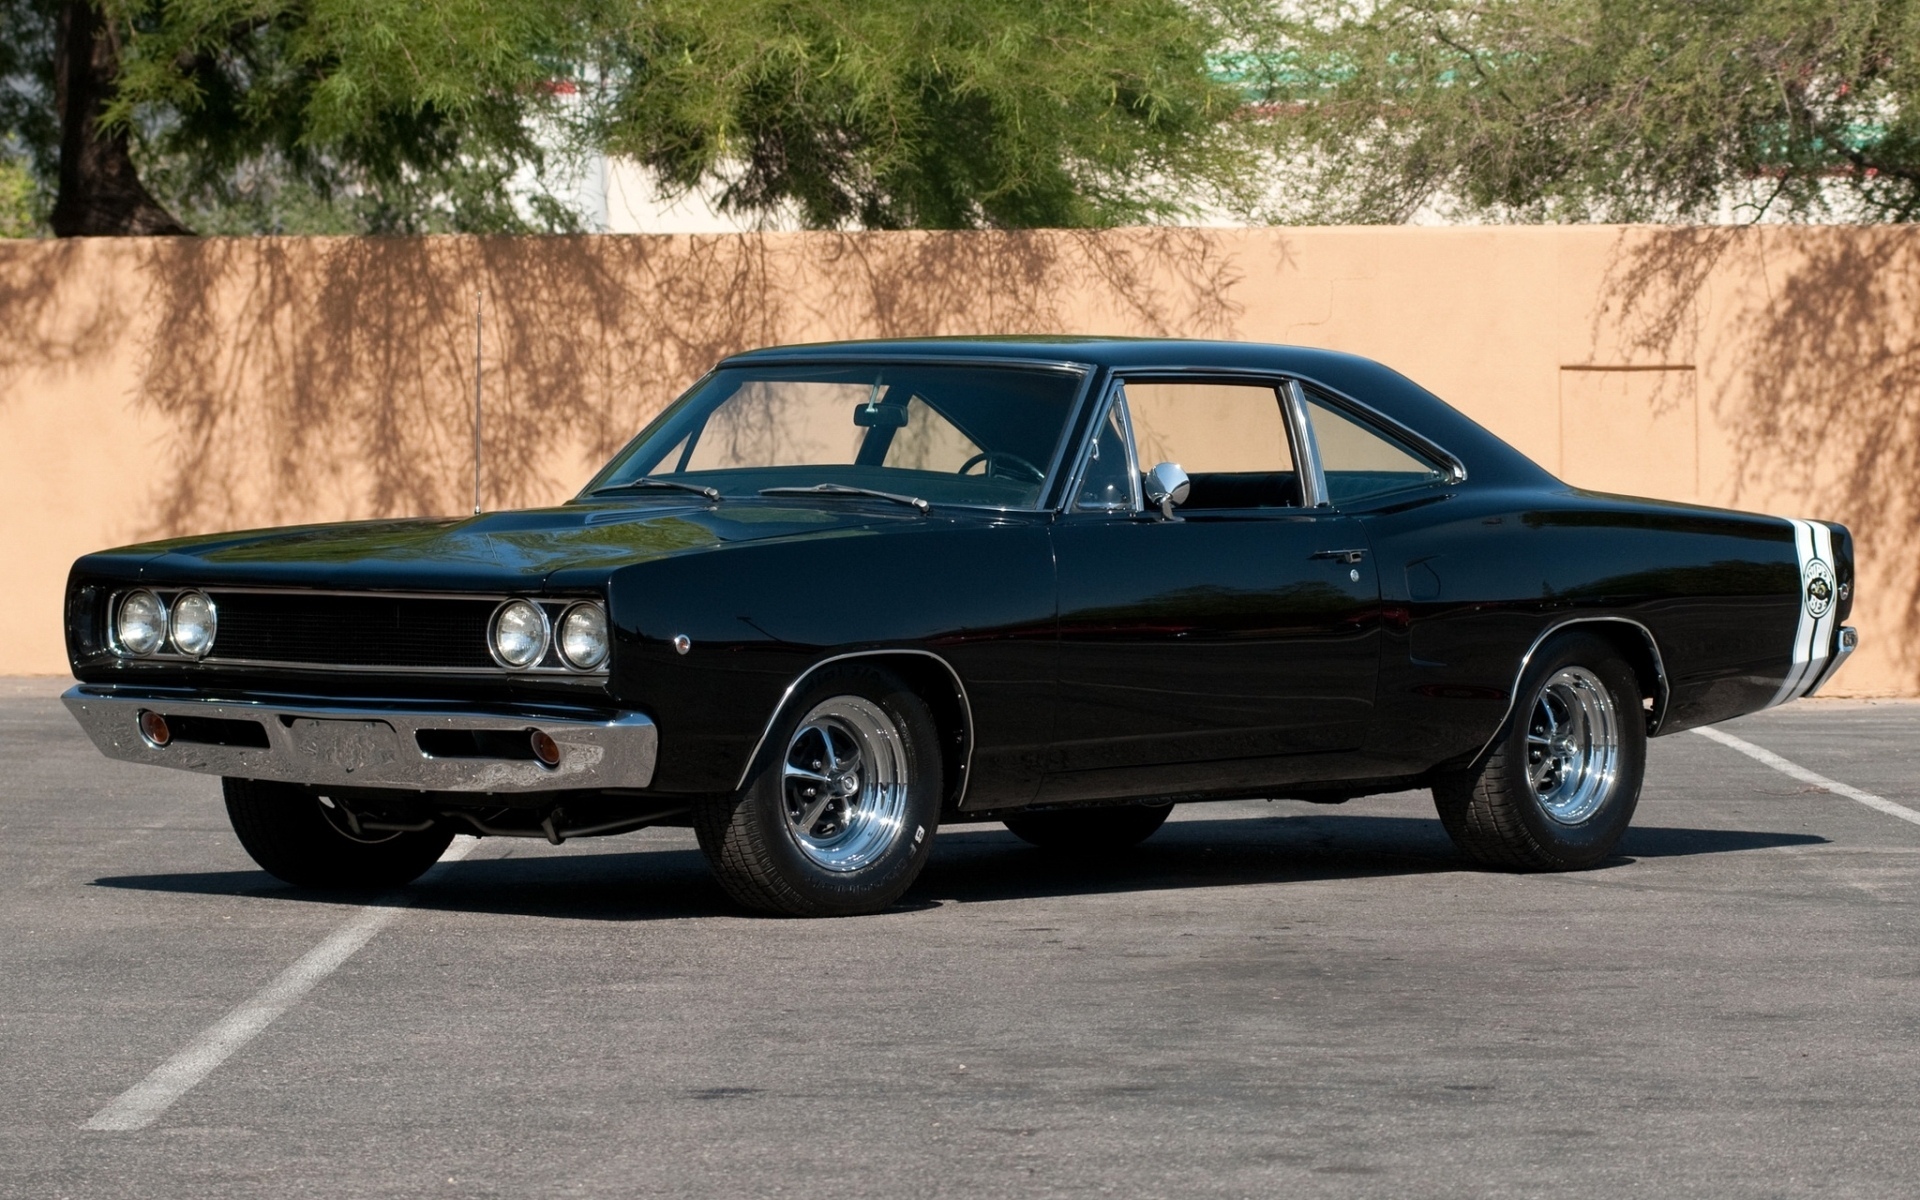 1968, Dodge, Charger, Super, Bee, Muscle, Cars Wallpaper